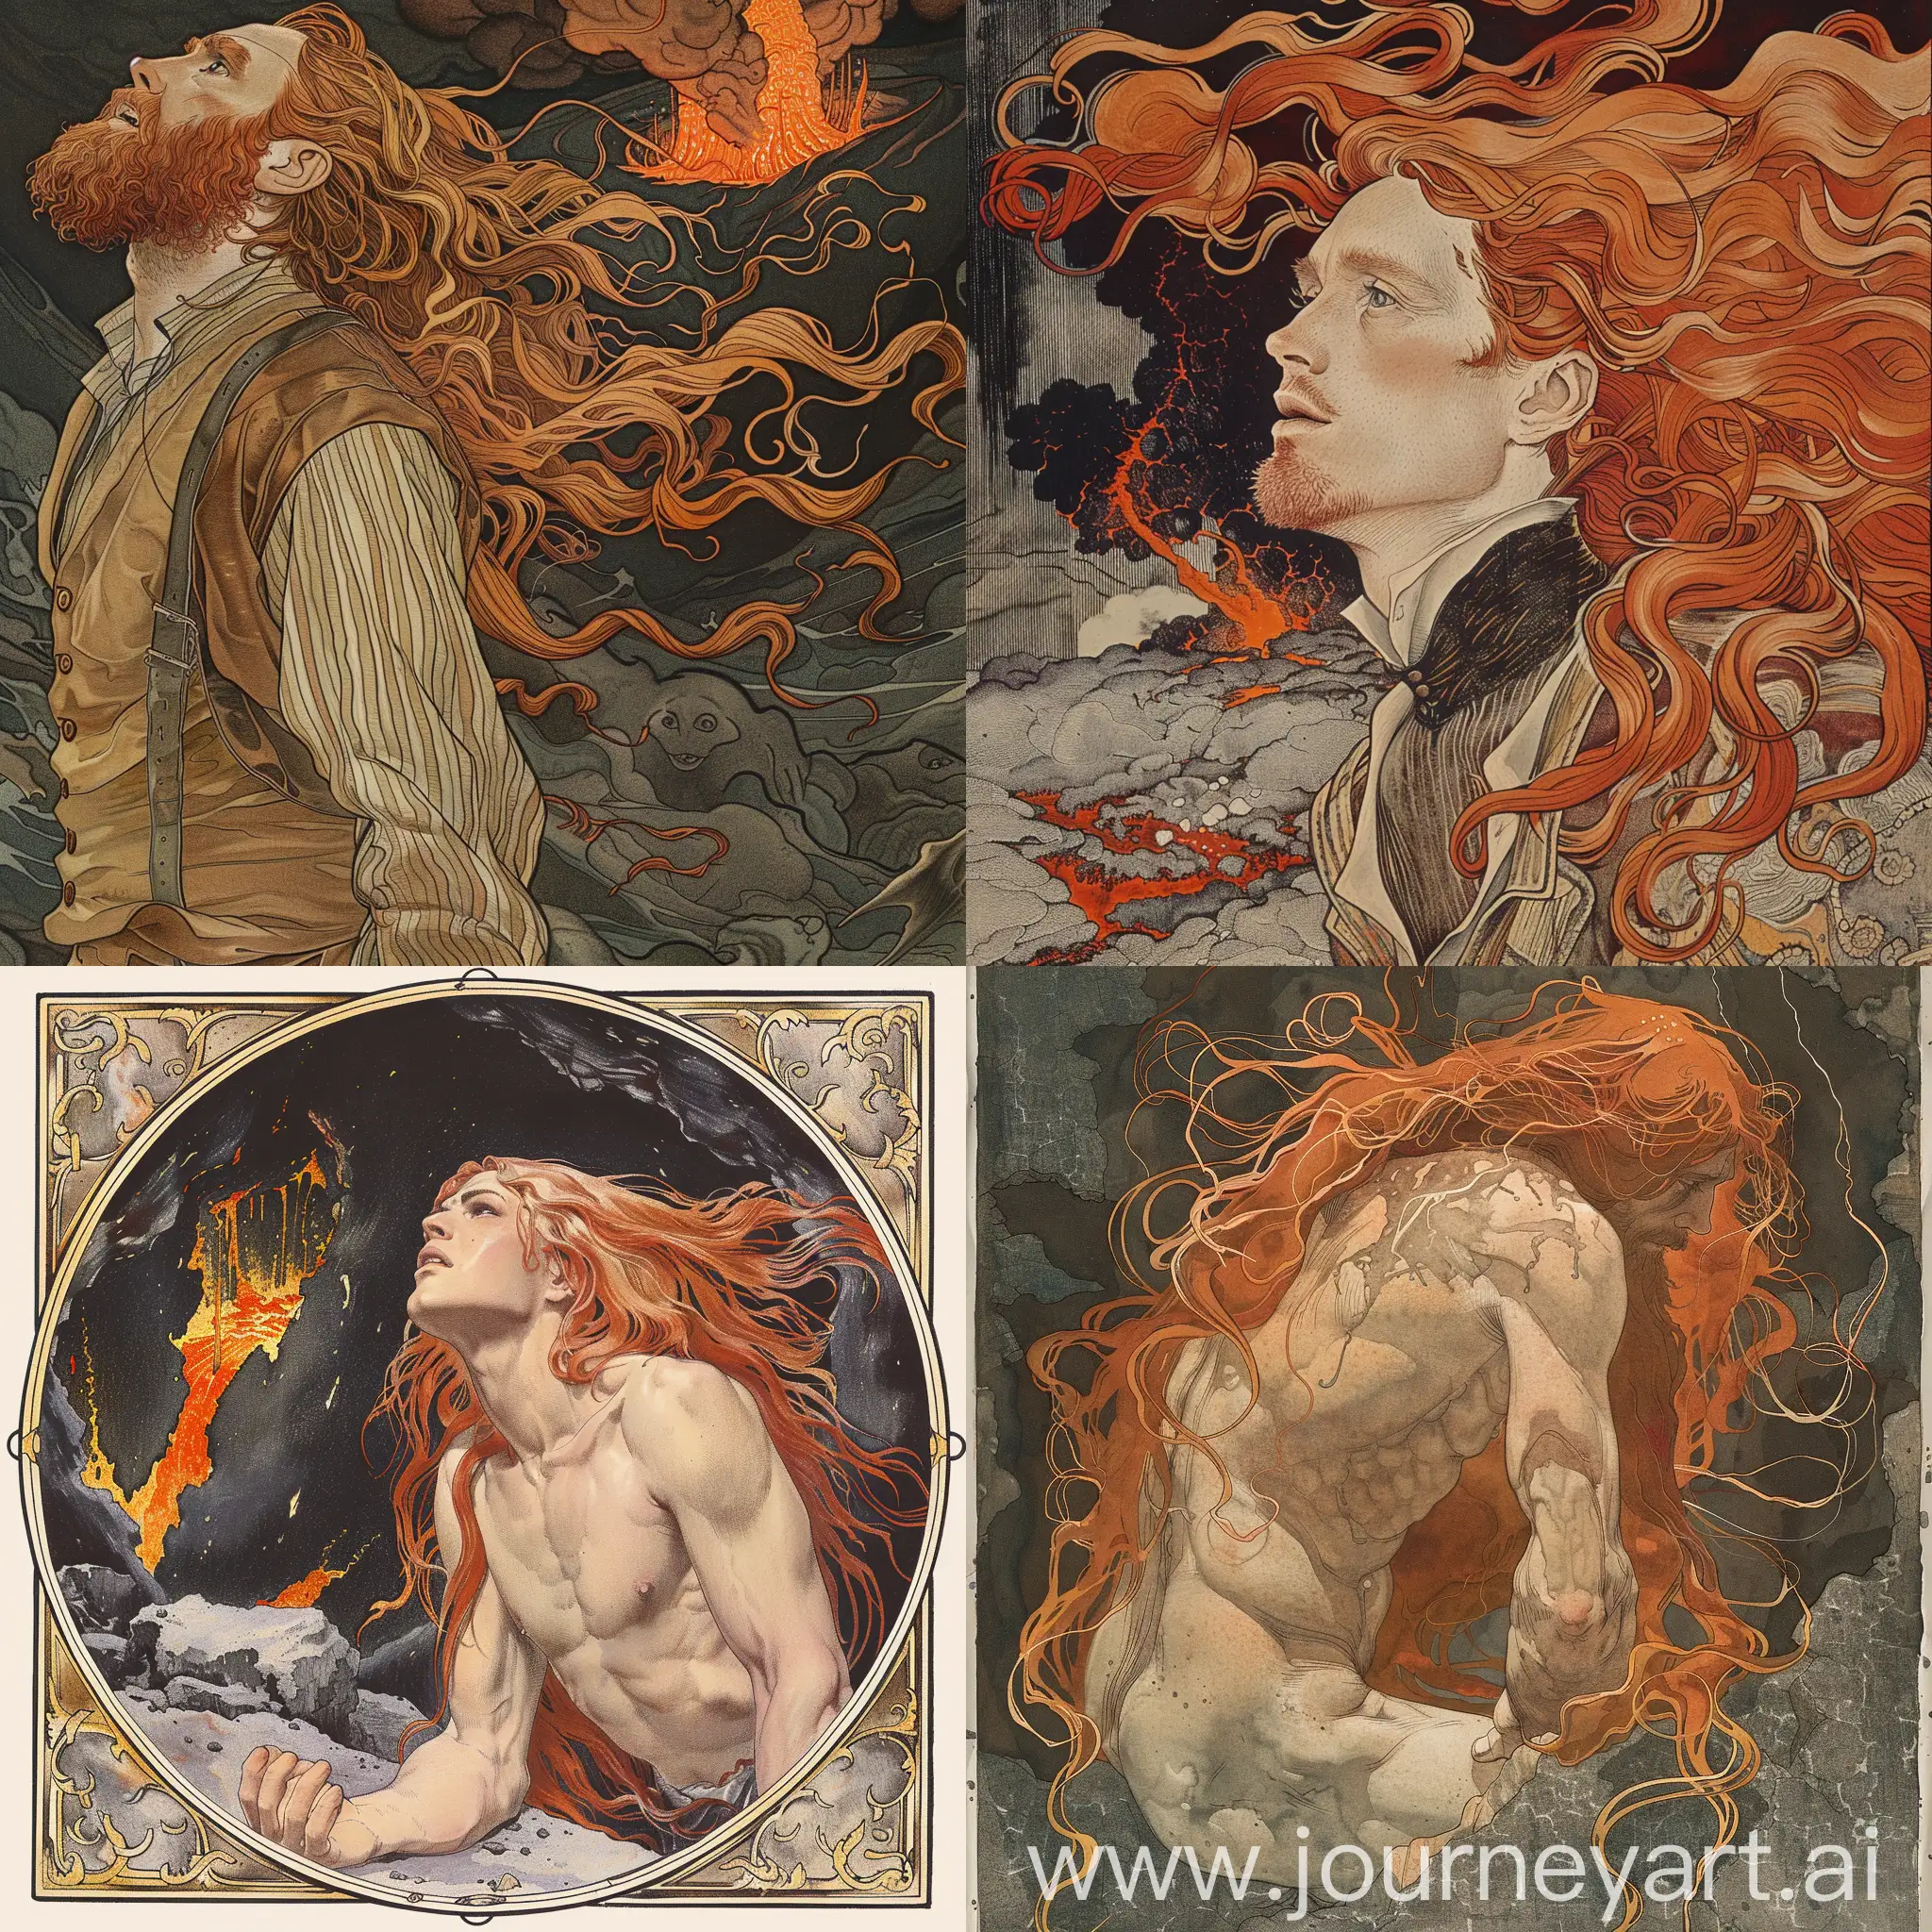 Man with long red hair, in the dark mantle, volcano, art nouveau, illustration